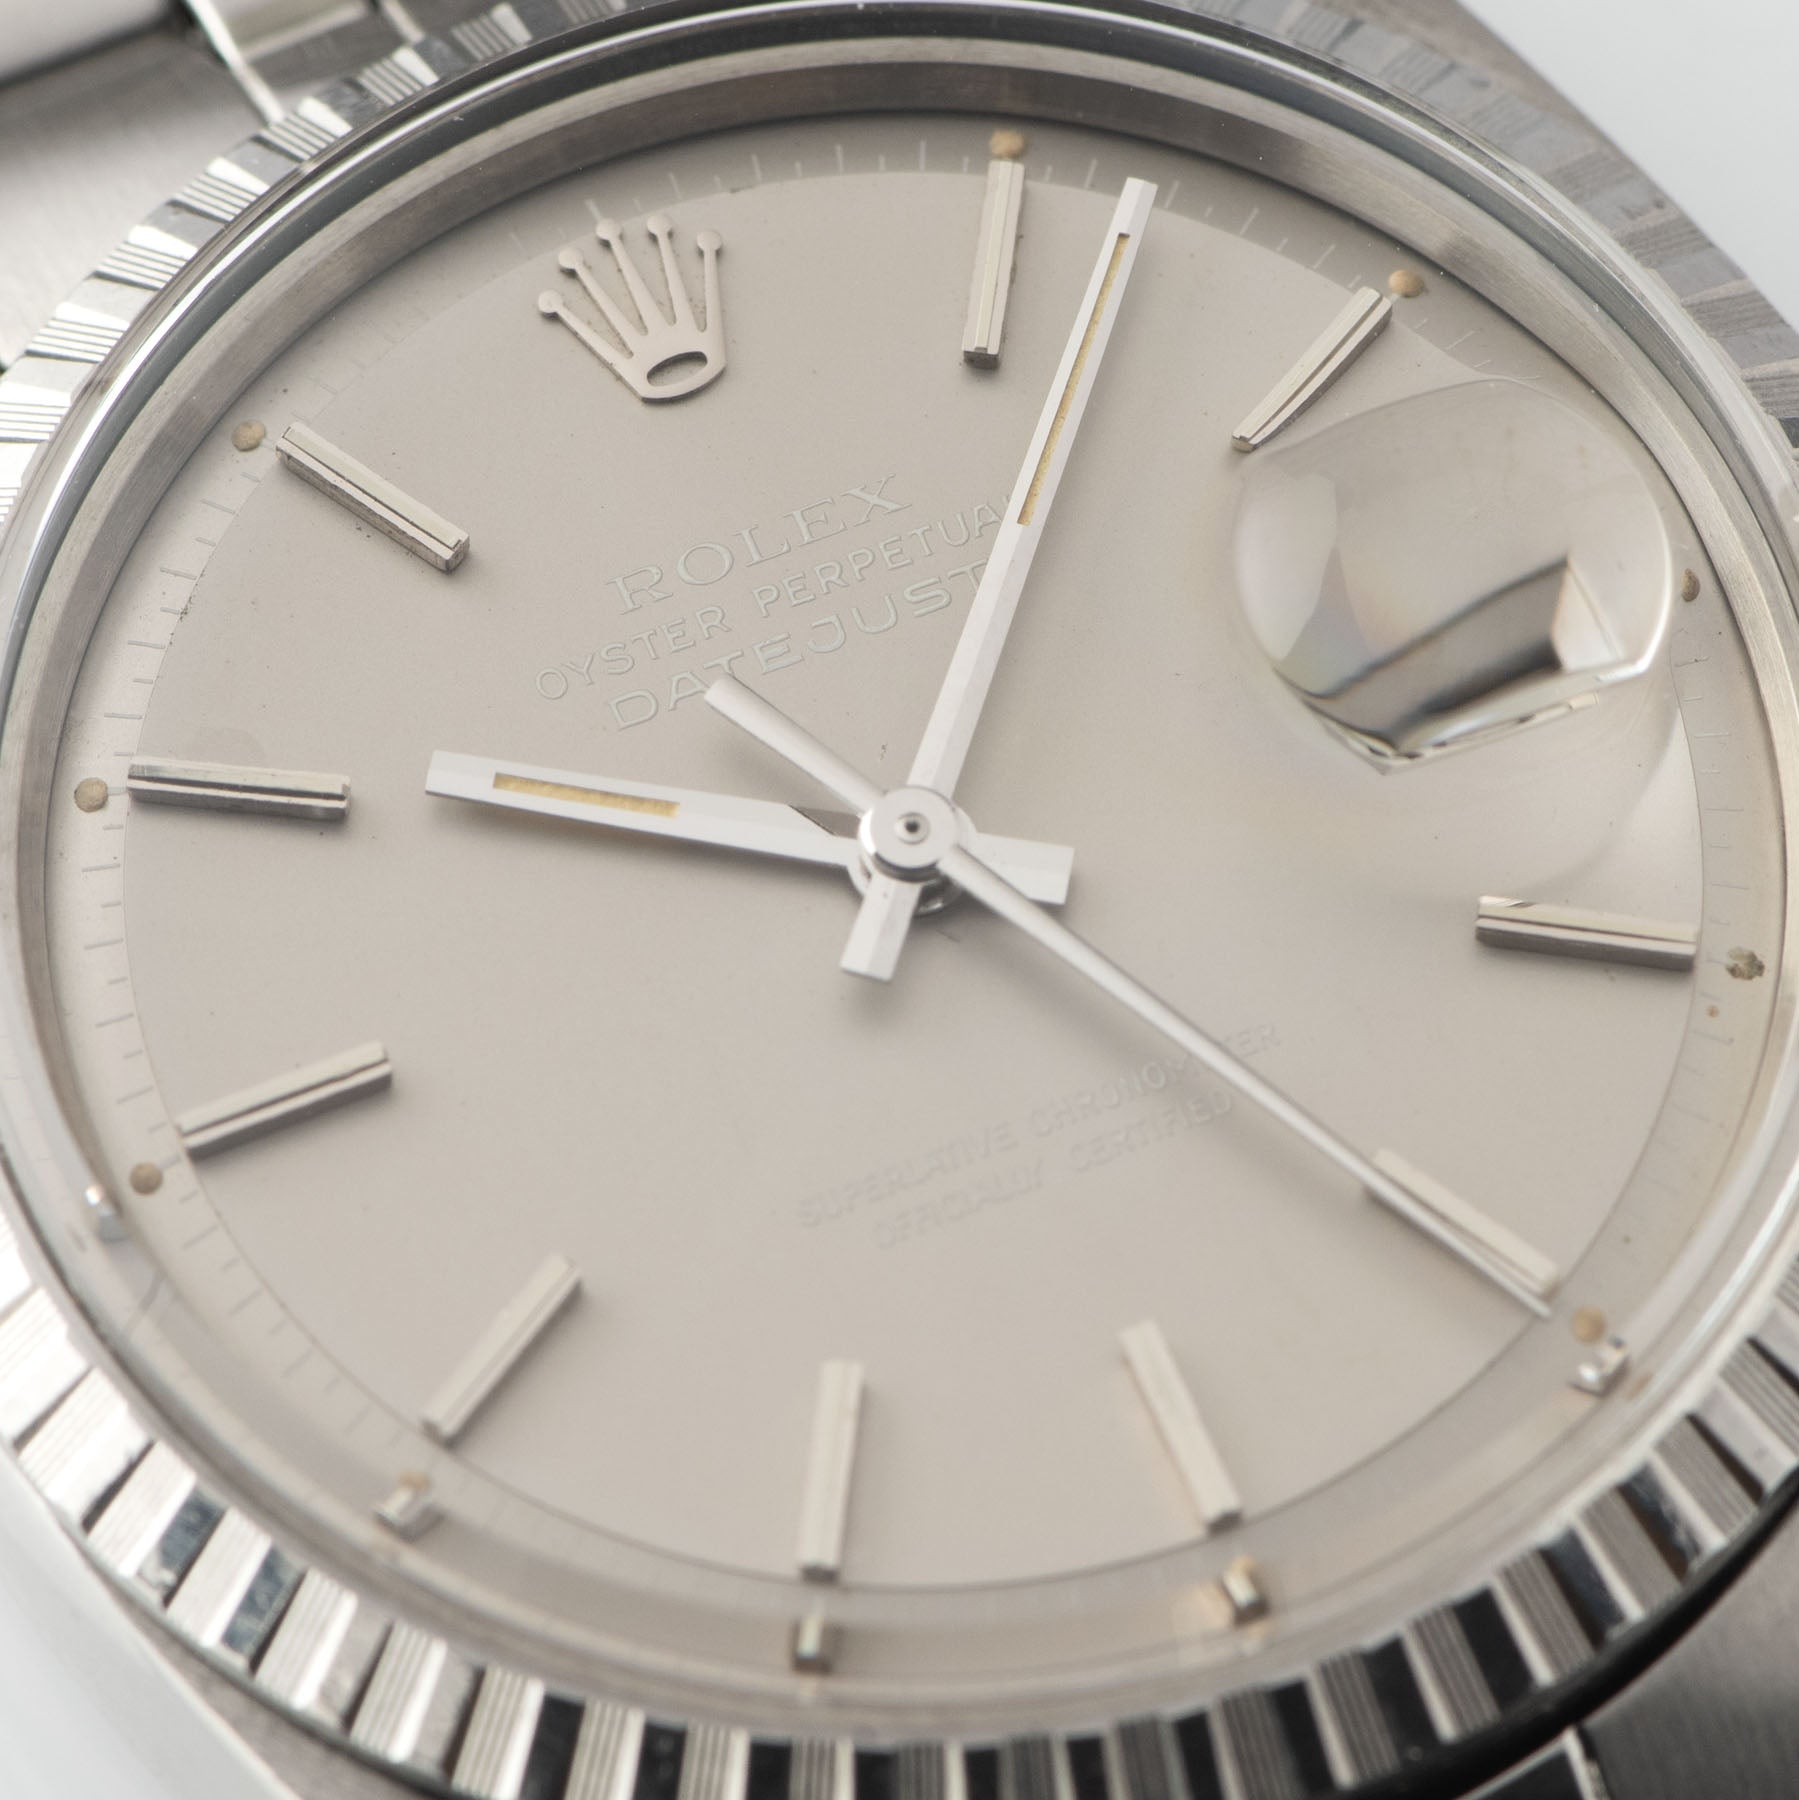 Rolex Datejust 1603 Grey Ghost Dial